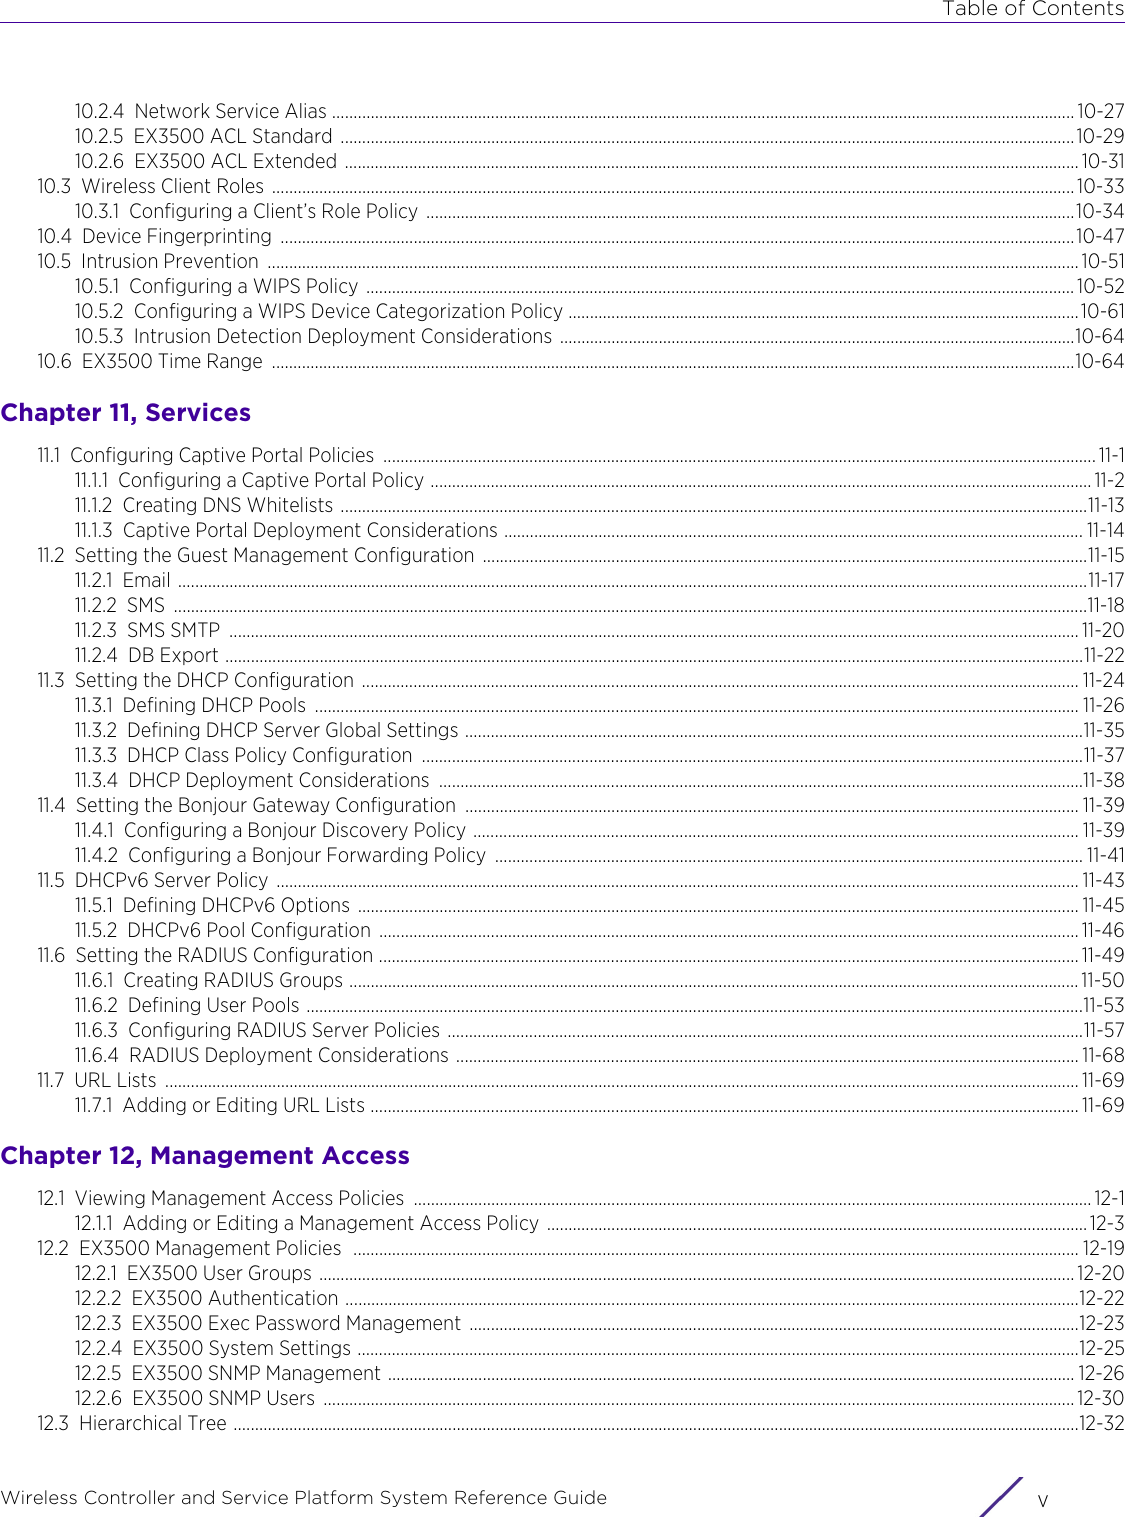 Table of ContentsWireless Controller and Service Platform System Reference Guide v10.2.4 Network Service Alias ............................................................................................................................................................................. 10-2710.2.5 EX3500 ACL Standard  ...........................................................................................................................................................................10-2910.2.6 EX3500 ACL Extended  ........................................................................................................................................................................... 10-3110.3 Wireless Client Roles  ........................................................................................................................................................................................... 10-3310.3.1 Configuring a Client’s Role Policy  .......................................................................................................................................................10-3410.4 Device Fingerprinting  .........................................................................................................................................................................................10-4710.5 Intrusion Prevention  ............................................................................................................................................................................................. 10-5110.5.1 Configuring a WIPS Policy  ..................................................................................................................................................................... 10-5210.5.2 Configuring a WIPS Device Categorization Policy ....................................................................................................................... 10-6110.5.3 Intrusion Detection Deployment Considerations ........................................................................................................................10-6410.6 EX3500 Time Range  ...........................................................................................................................................................................................10-64Chapter 11, Services11.1 Configuring Captive Portal Policies  ...................................................................................................................................................................... 11-111.1.1 Configuring a Captive Portal Policy .......................................................................................................................................................... 11-211.1.2 Creating DNS Whitelists ..............................................................................................................................................................................11-1311.1.3 Captive Portal Deployment Considerations ....................................................................................................................................... 11-1411.2 Setting the Guest Management Configuration  .............................................................................................................................................11-1511.2.1 Email ....................................................................................................................................................................................................................11-1711.2.2 SMS .....................................................................................................................................................................................................................11-1811.2.3 SMS SMTP  ...................................................................................................................................................................................................... 11-2011.2.4 DB Export ........................................................................................................................................................................................................11-2211.3 Setting the DHCP Configuration  ....................................................................................................................................................................... 11-2411.3.1 Defining DHCP Pools  .................................................................................................................................................................................. 11-2611.3.2 Defining DHCP Server Global Settings ................................................................................................................................................11-3511.3.3 DHCP Class Policy Configuration  ..........................................................................................................................................................11-3711.3.4 DHCP Deployment Considerations  ......................................................................................................................................................11-3811.4 Setting the Bonjour Gateway Configuration  ............................................................................................................................................... 11-3911.4.1 Configuring a Bonjour Discovery Policy ............................................................................................................................................. 11-3911.4.2 Configuring a Bonjour Forwarding Policy  ......................................................................................................................................... 11-4111.5 DHCPv6 Server Policy  ........................................................................................................................................................................................... 11-4311.5.1 Defining DHCPv6 Options  ........................................................................................................................................................................ 11-4511.5.2 DHCPv6 Pool Configuration  ................................................................................................................................................................... 11-4611.6 Setting the RADIUS Configuration ................................................................................................................................................................... 11-4911.6.1 Creating RADIUS Groups .......................................................................................................................................................................... 11-5011.6.2 Defining User Pools .....................................................................................................................................................................................11-5311.6.3 Configuring RADIUS Server Policies ....................................................................................................................................................11-5711.6.4 RADIUS Deployment Considerations ................................................................................................................................................. 11-6811.7 URL Lists  ..................................................................................................................................................................................................................... 11-6911.7.1 Adding or Editing URL Lists ..................................................................................................................................................................... 11-69Chapter 12, Management Access12.1 Viewing Management Access Policies  .............................................................................................................................................................. 12-112.1.1 Adding or Editing a Management Access Policy .............................................................................................................................. 12-312.2 EX3500 Management Policies  ......................................................................................................................................................................... 12-1912.2.1 EX3500 User Groups ................................................................................................................................................................................ 12-2012.2.2 EX3500 Authentication ...........................................................................................................................................................................12-2212.2.3 EX3500 Exec Password Management  ..............................................................................................................................................12-2312.2.4 EX3500 System Settings ........................................................................................................................................................................12-2512.2.5 EX3500 SNMP Management ................................................................................................................................................................ 12-2612.2.6 EX3500 SNMP Users  ............................................................................................................................................................................... 12-3012.3 Hierarchical Tree .....................................................................................................................................................................................................12-32